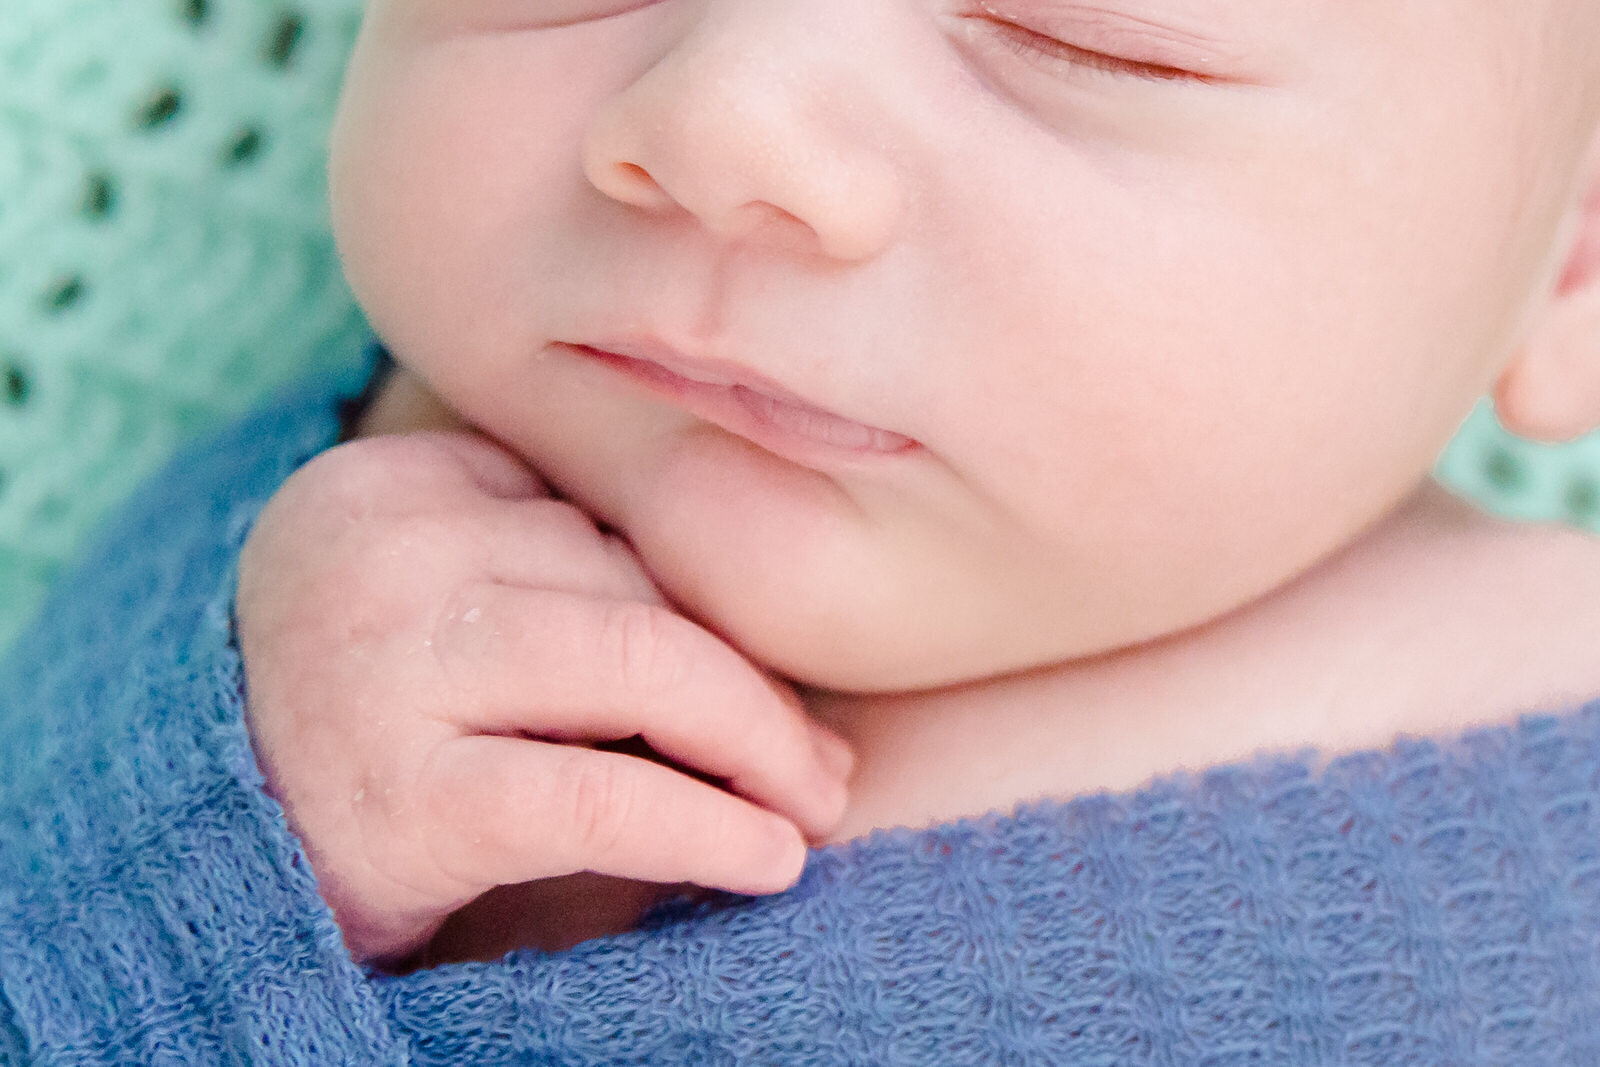 Close up photo of sleeping newborn baby placing his hand by his face while staddled